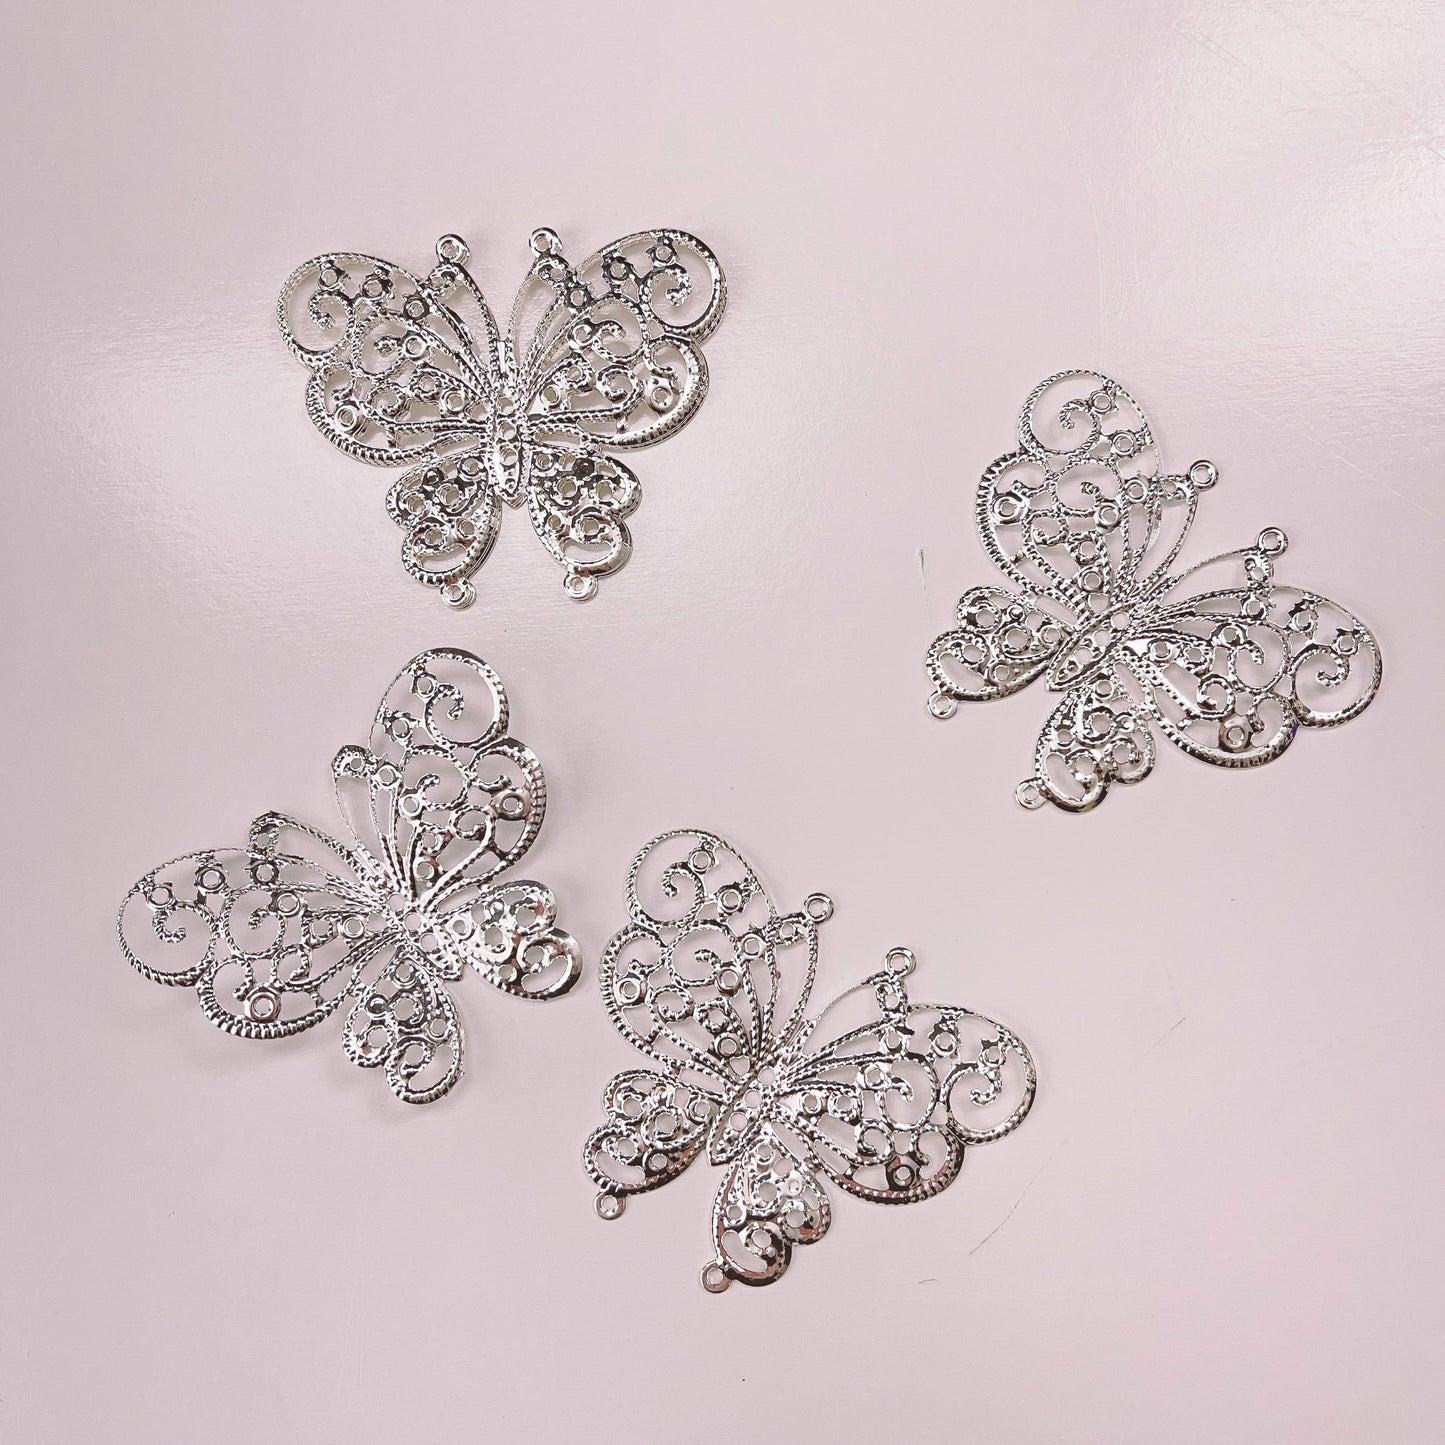 More Decos Giant Silver Arched Butterflies 6.5cm x 5.5cm Wing Span - Pack of 5